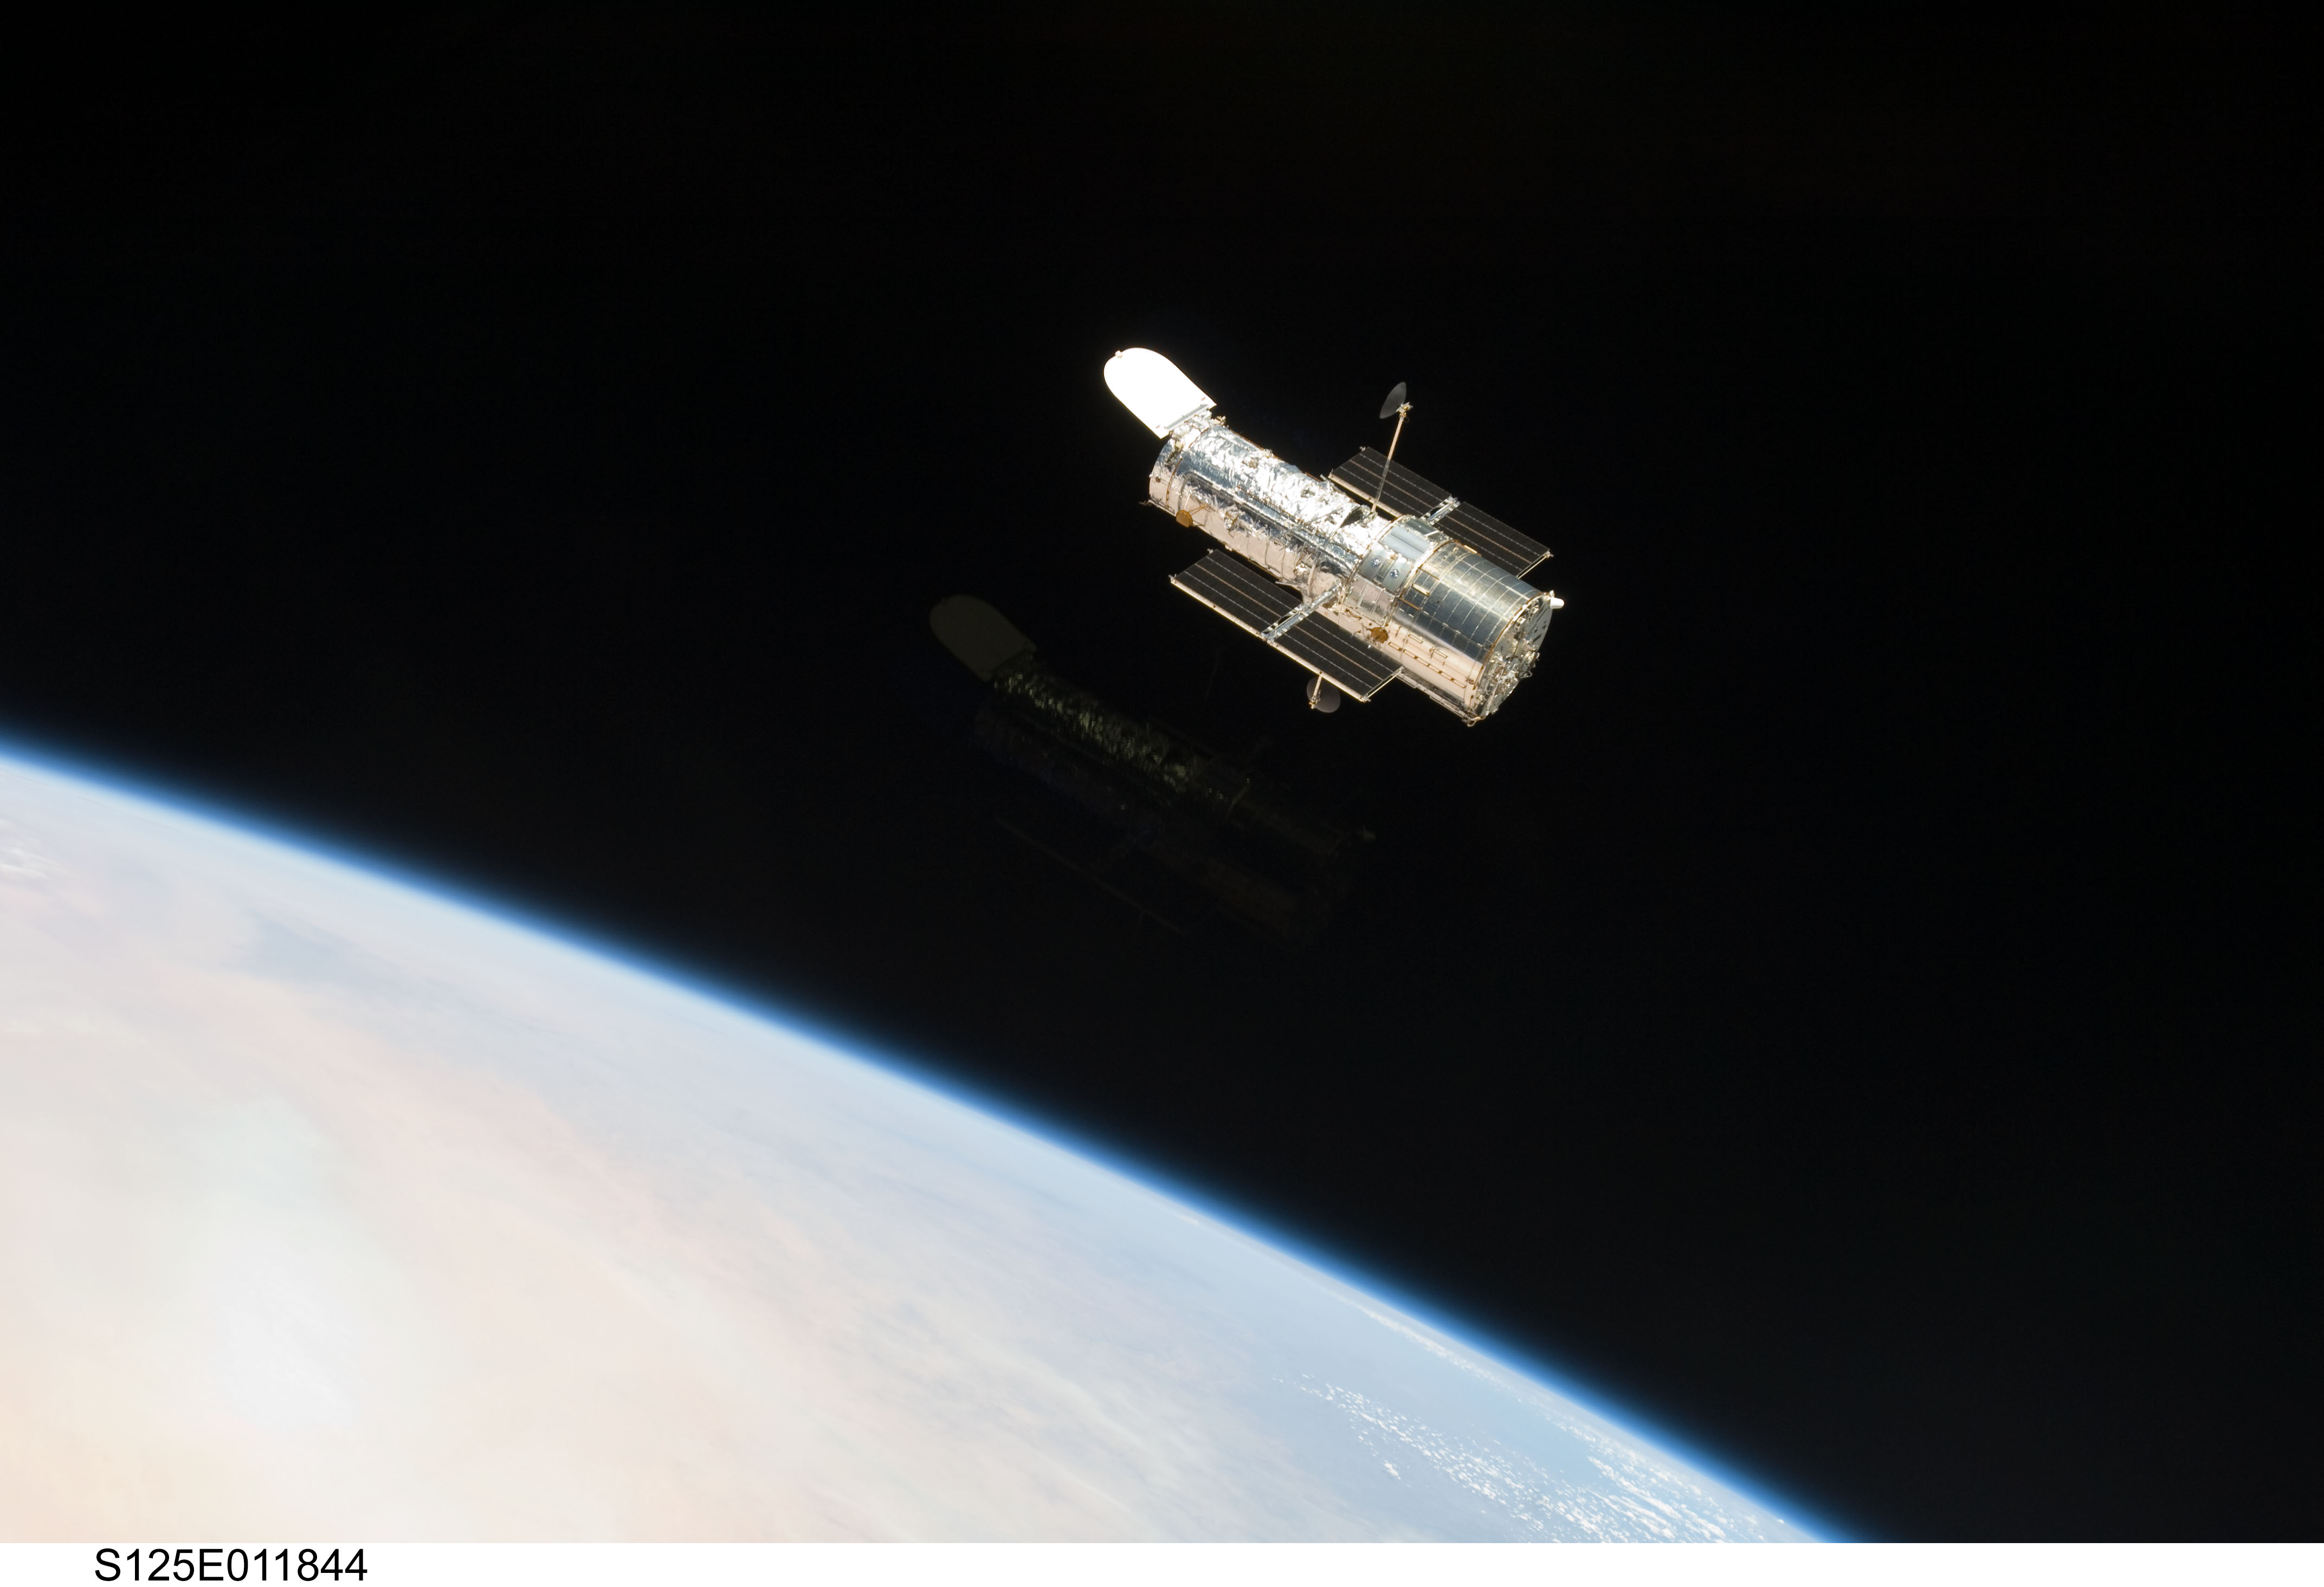 NASA’s Hubble Space Telescope to Resume Science Operations Soon